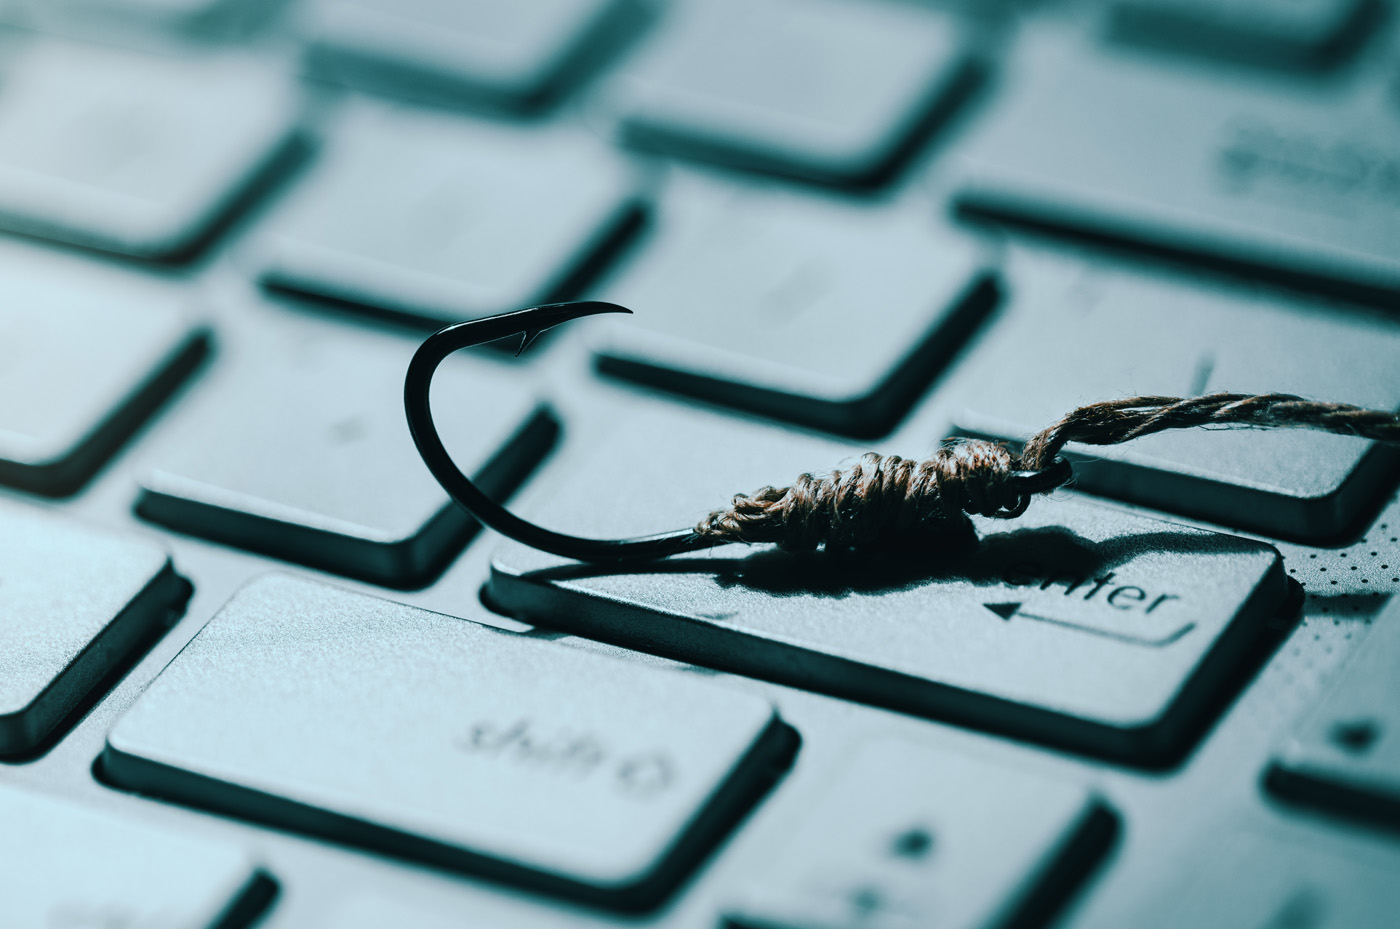 Massive EvilProxy Phishing Attack Campaign Bypasses 2FA, Targets Top-Level Executives – Source: www.techrepublic.com